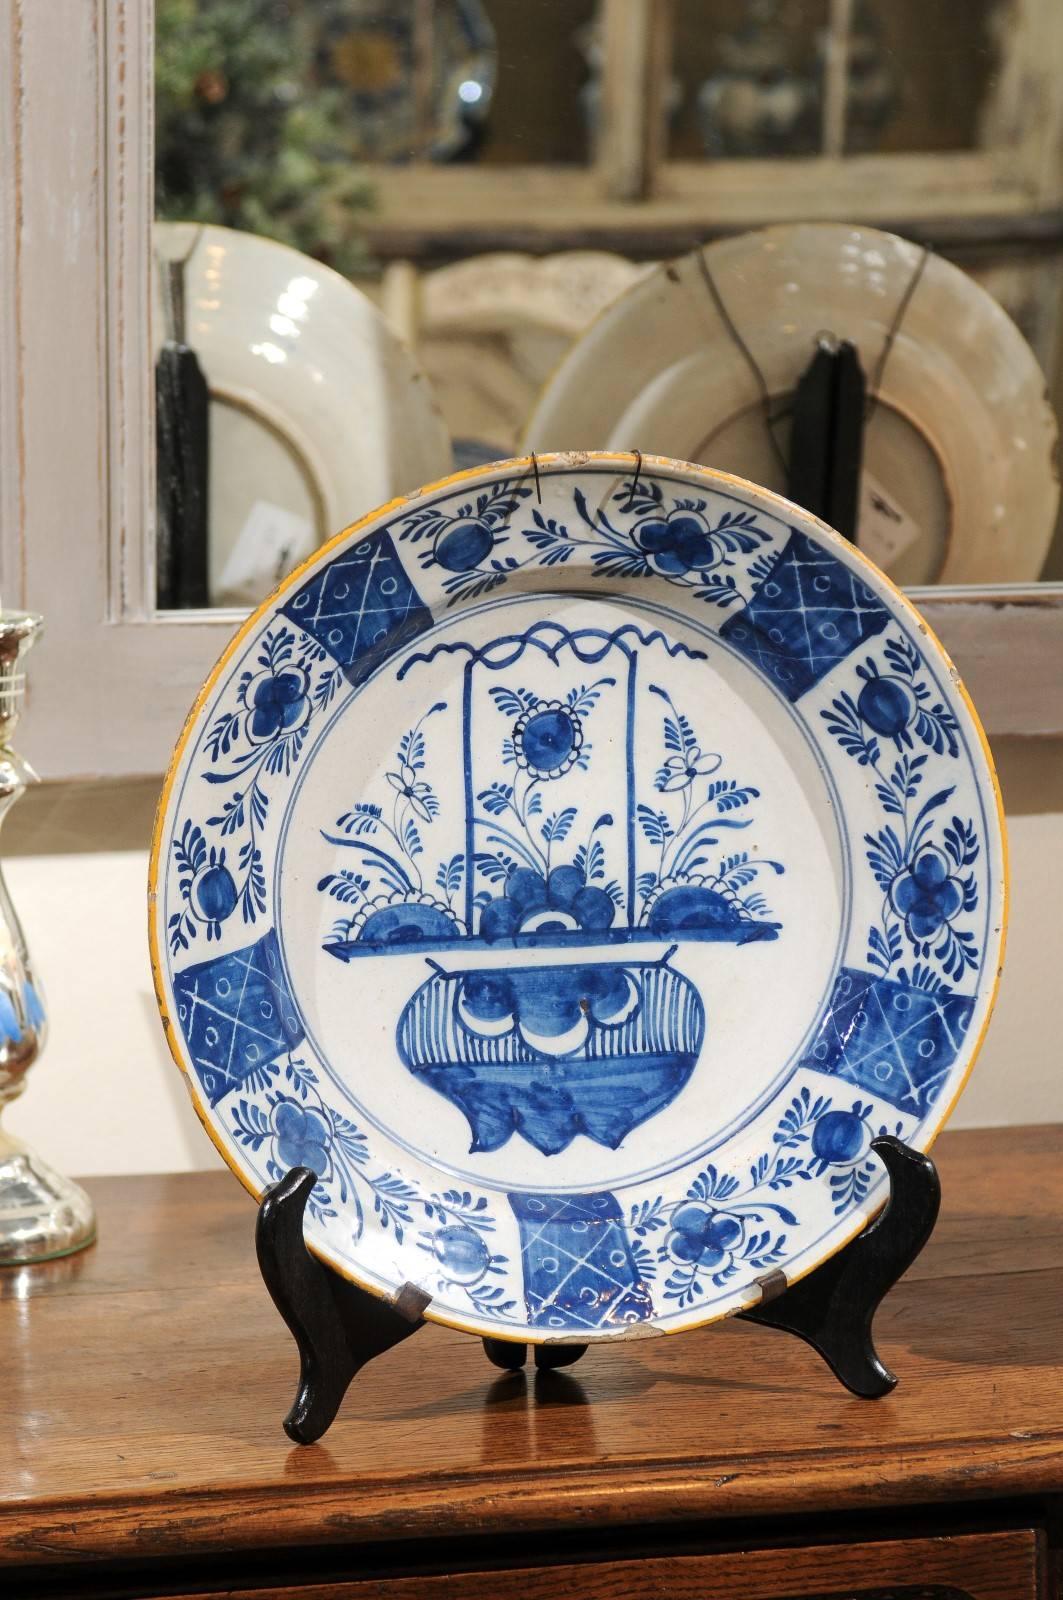 Pair of 17th century blue delft chargers, circa 1690
A stunning pair of delft chargers with a very creative design. Your first look at the center seems to be that of an urn. However, could that be bulbs underground and the flowers blooming above?